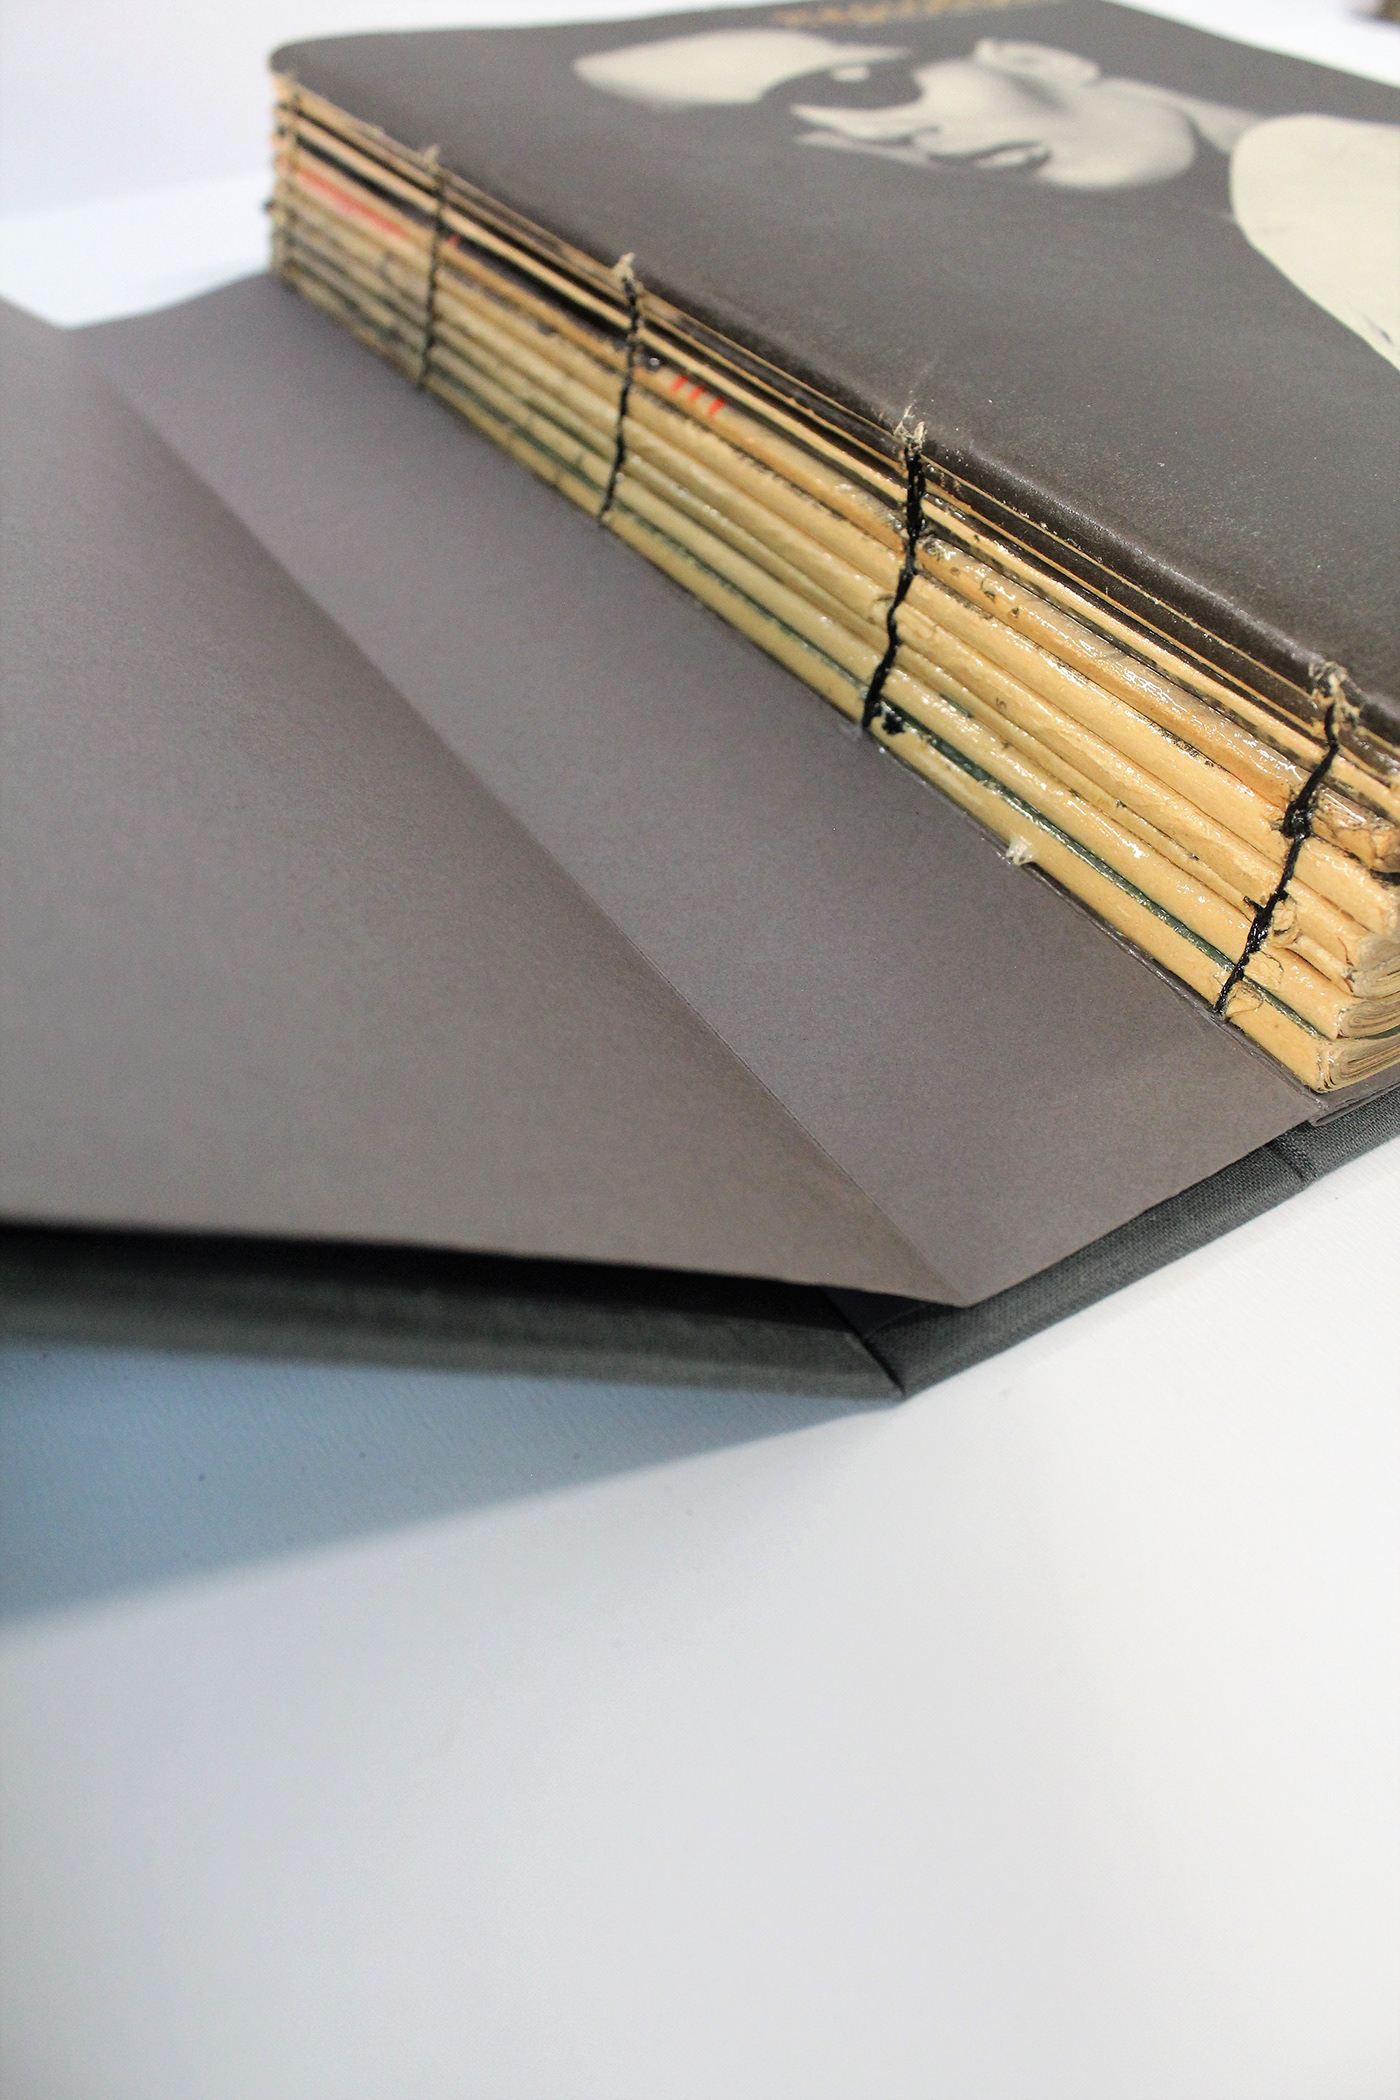 hot foil printing hand bookbinding Swiss style bookbinding exposed spine bookbinding